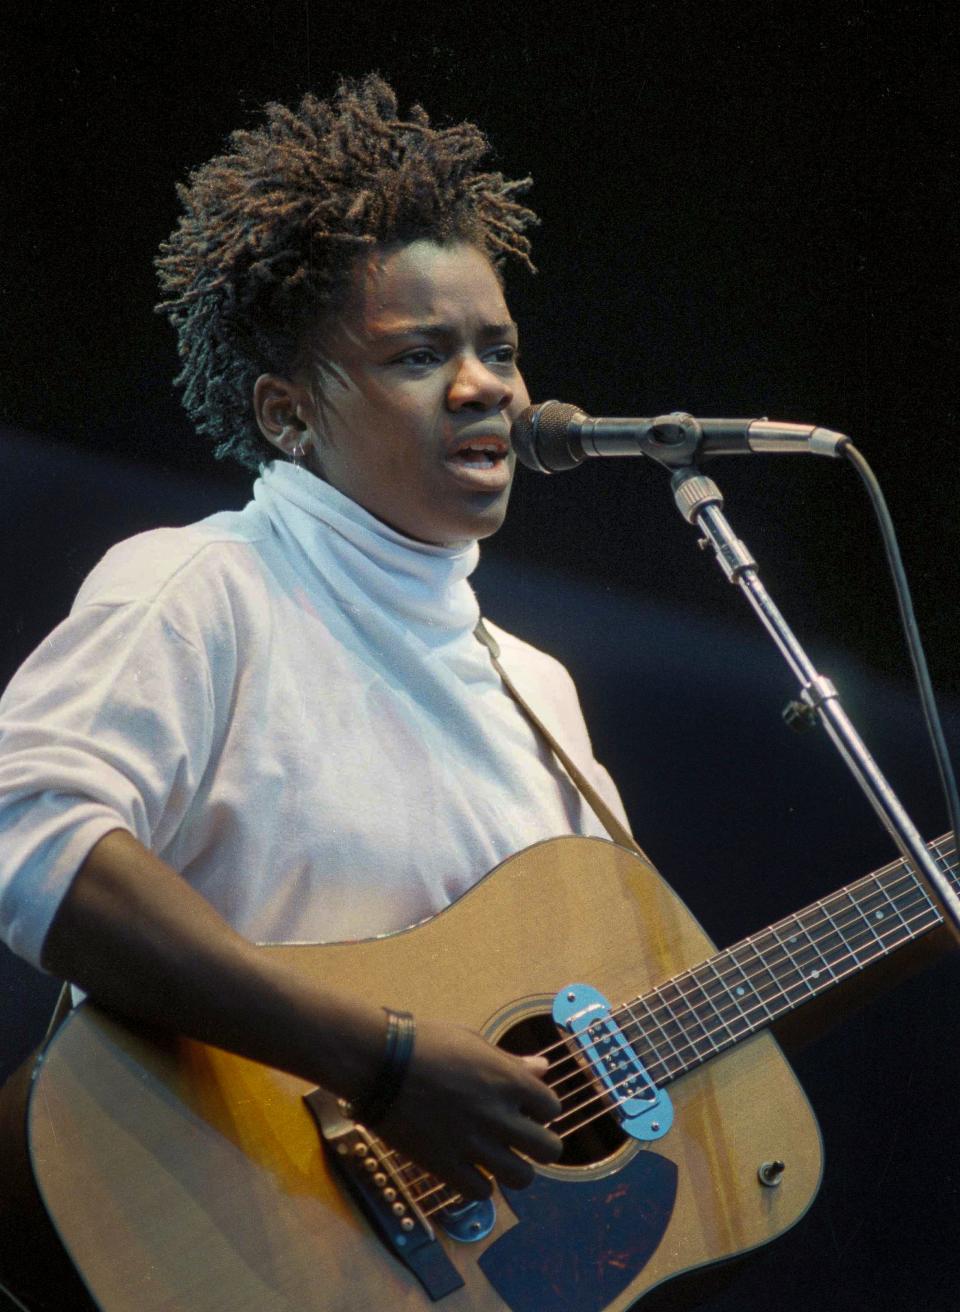 Folk singer Tracy Chapman sings at Wembley Stadium in London at a concert for human rights by Amnesty International in 1988.